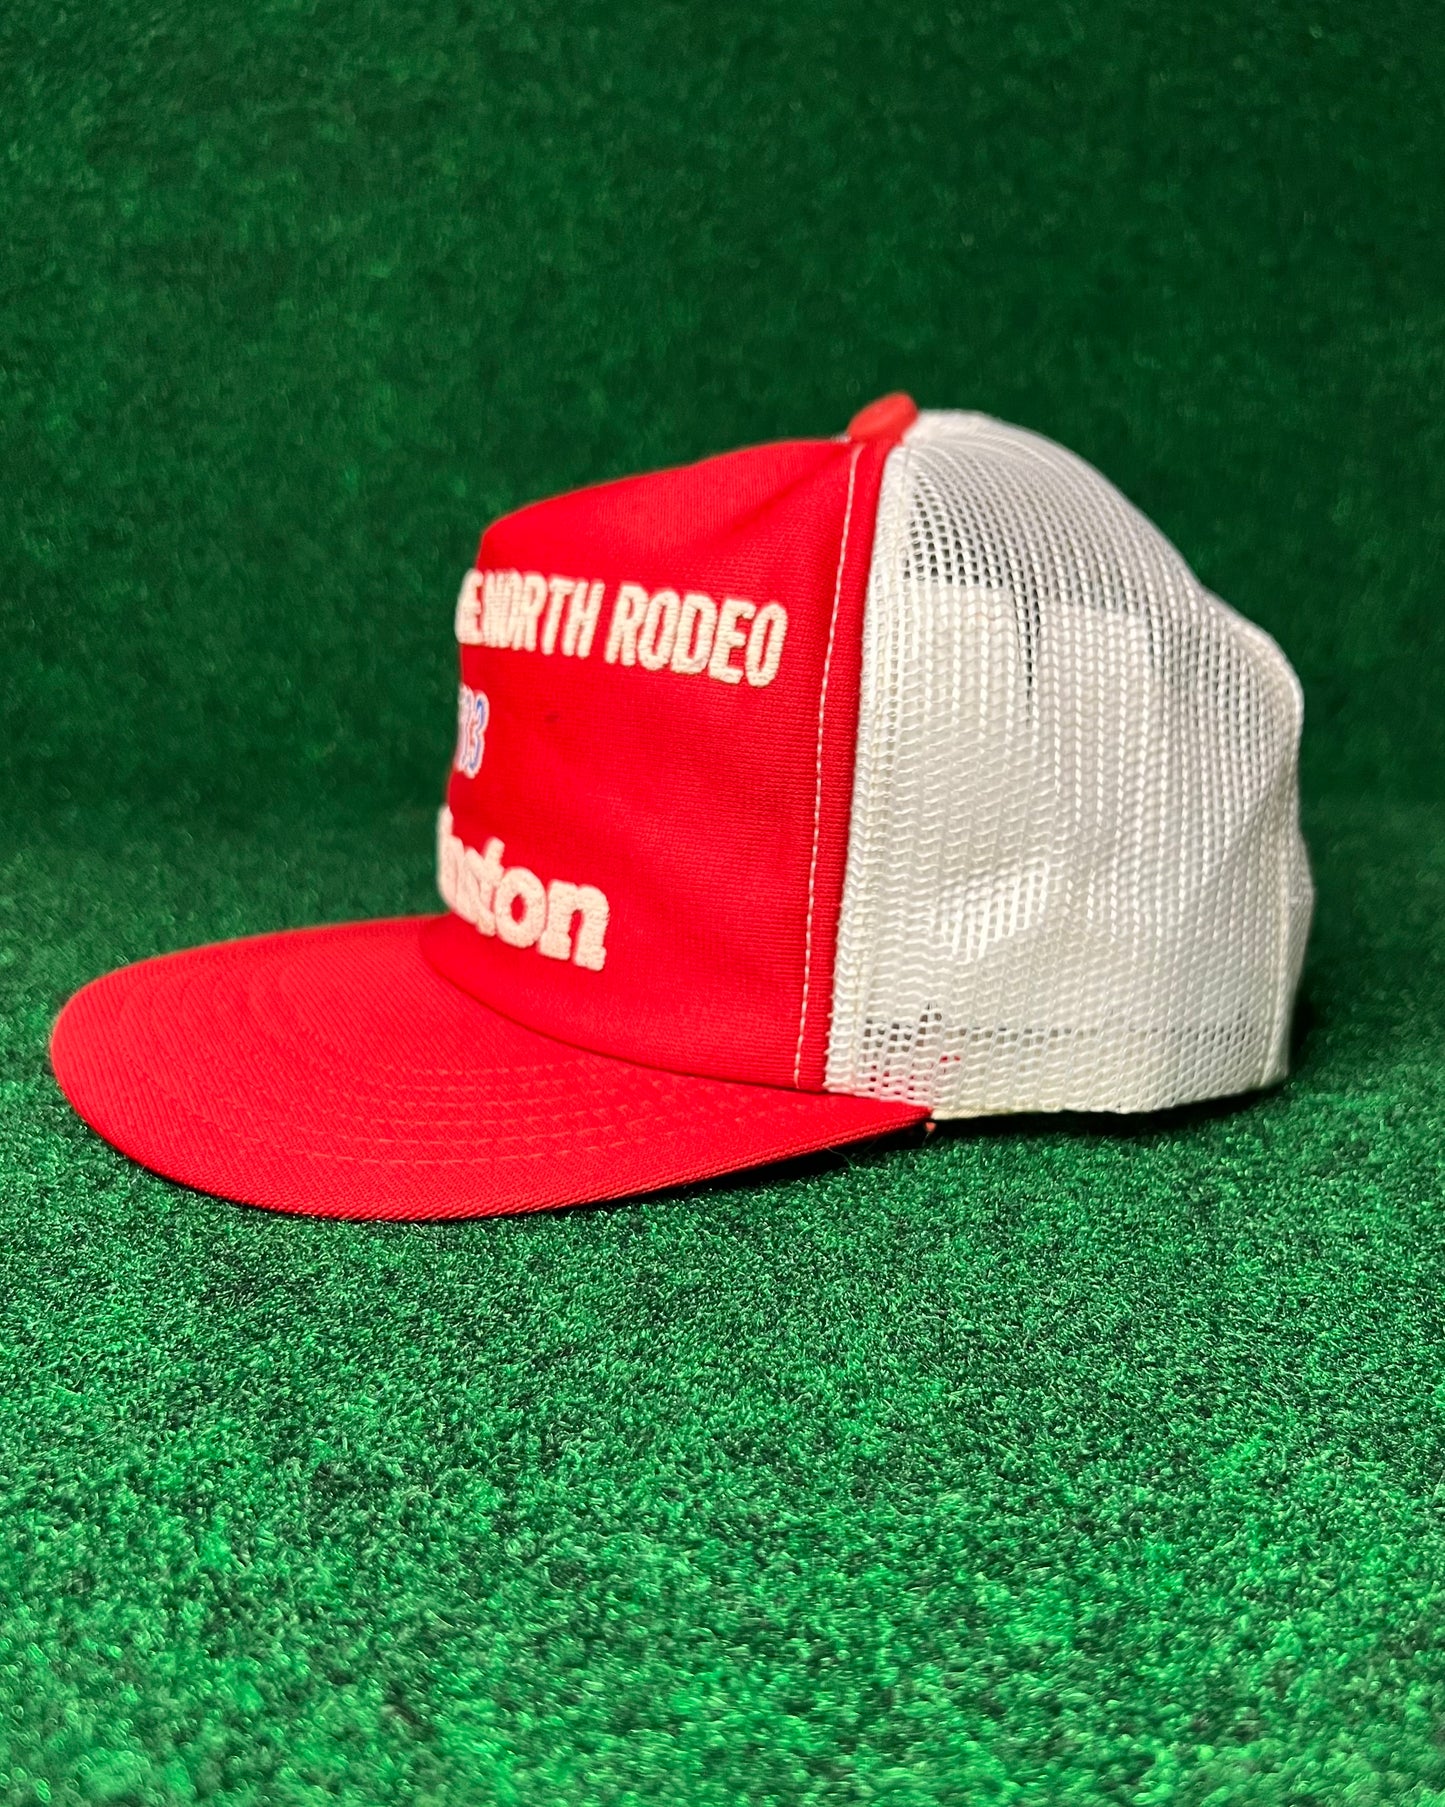 1983 Winston: Heart of the North Rodeo Truckers Hat